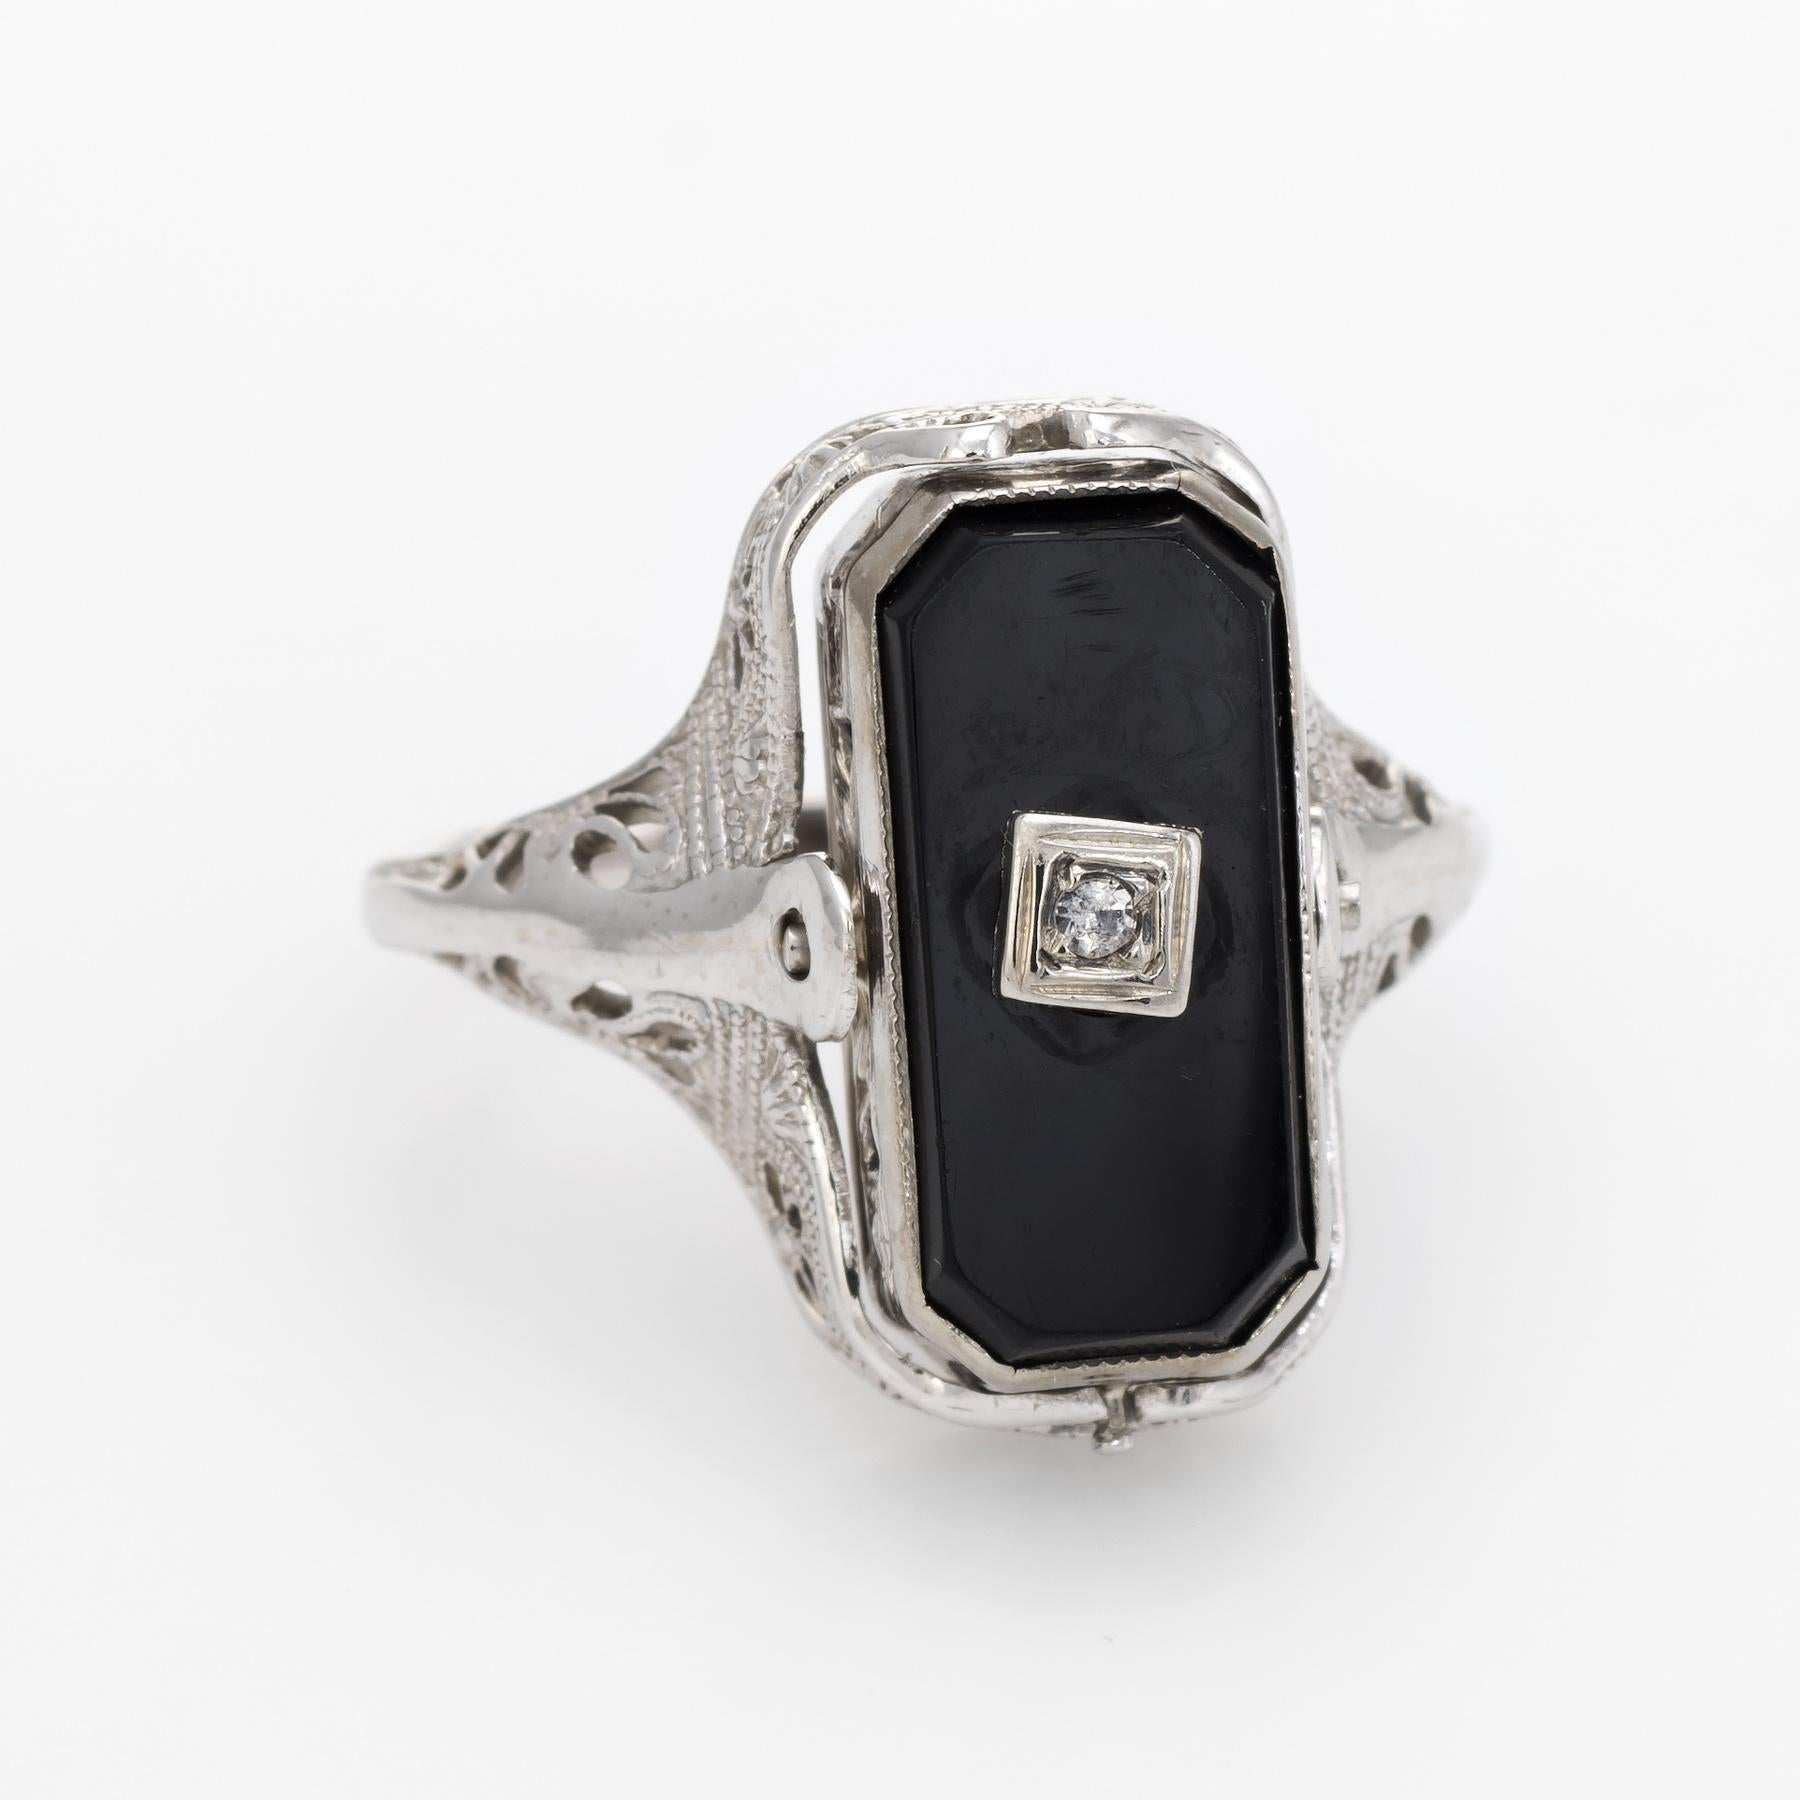 Finely detailed Art Deco era ring (circa 1920s to 1930s), crafted in 14 karat white gold. 

The 'flip' ring features one side set with onyx (measuring 14mm x 6mm) and the other side set with amethyst (measuring 14mm x 6mm - estimated at 2.50